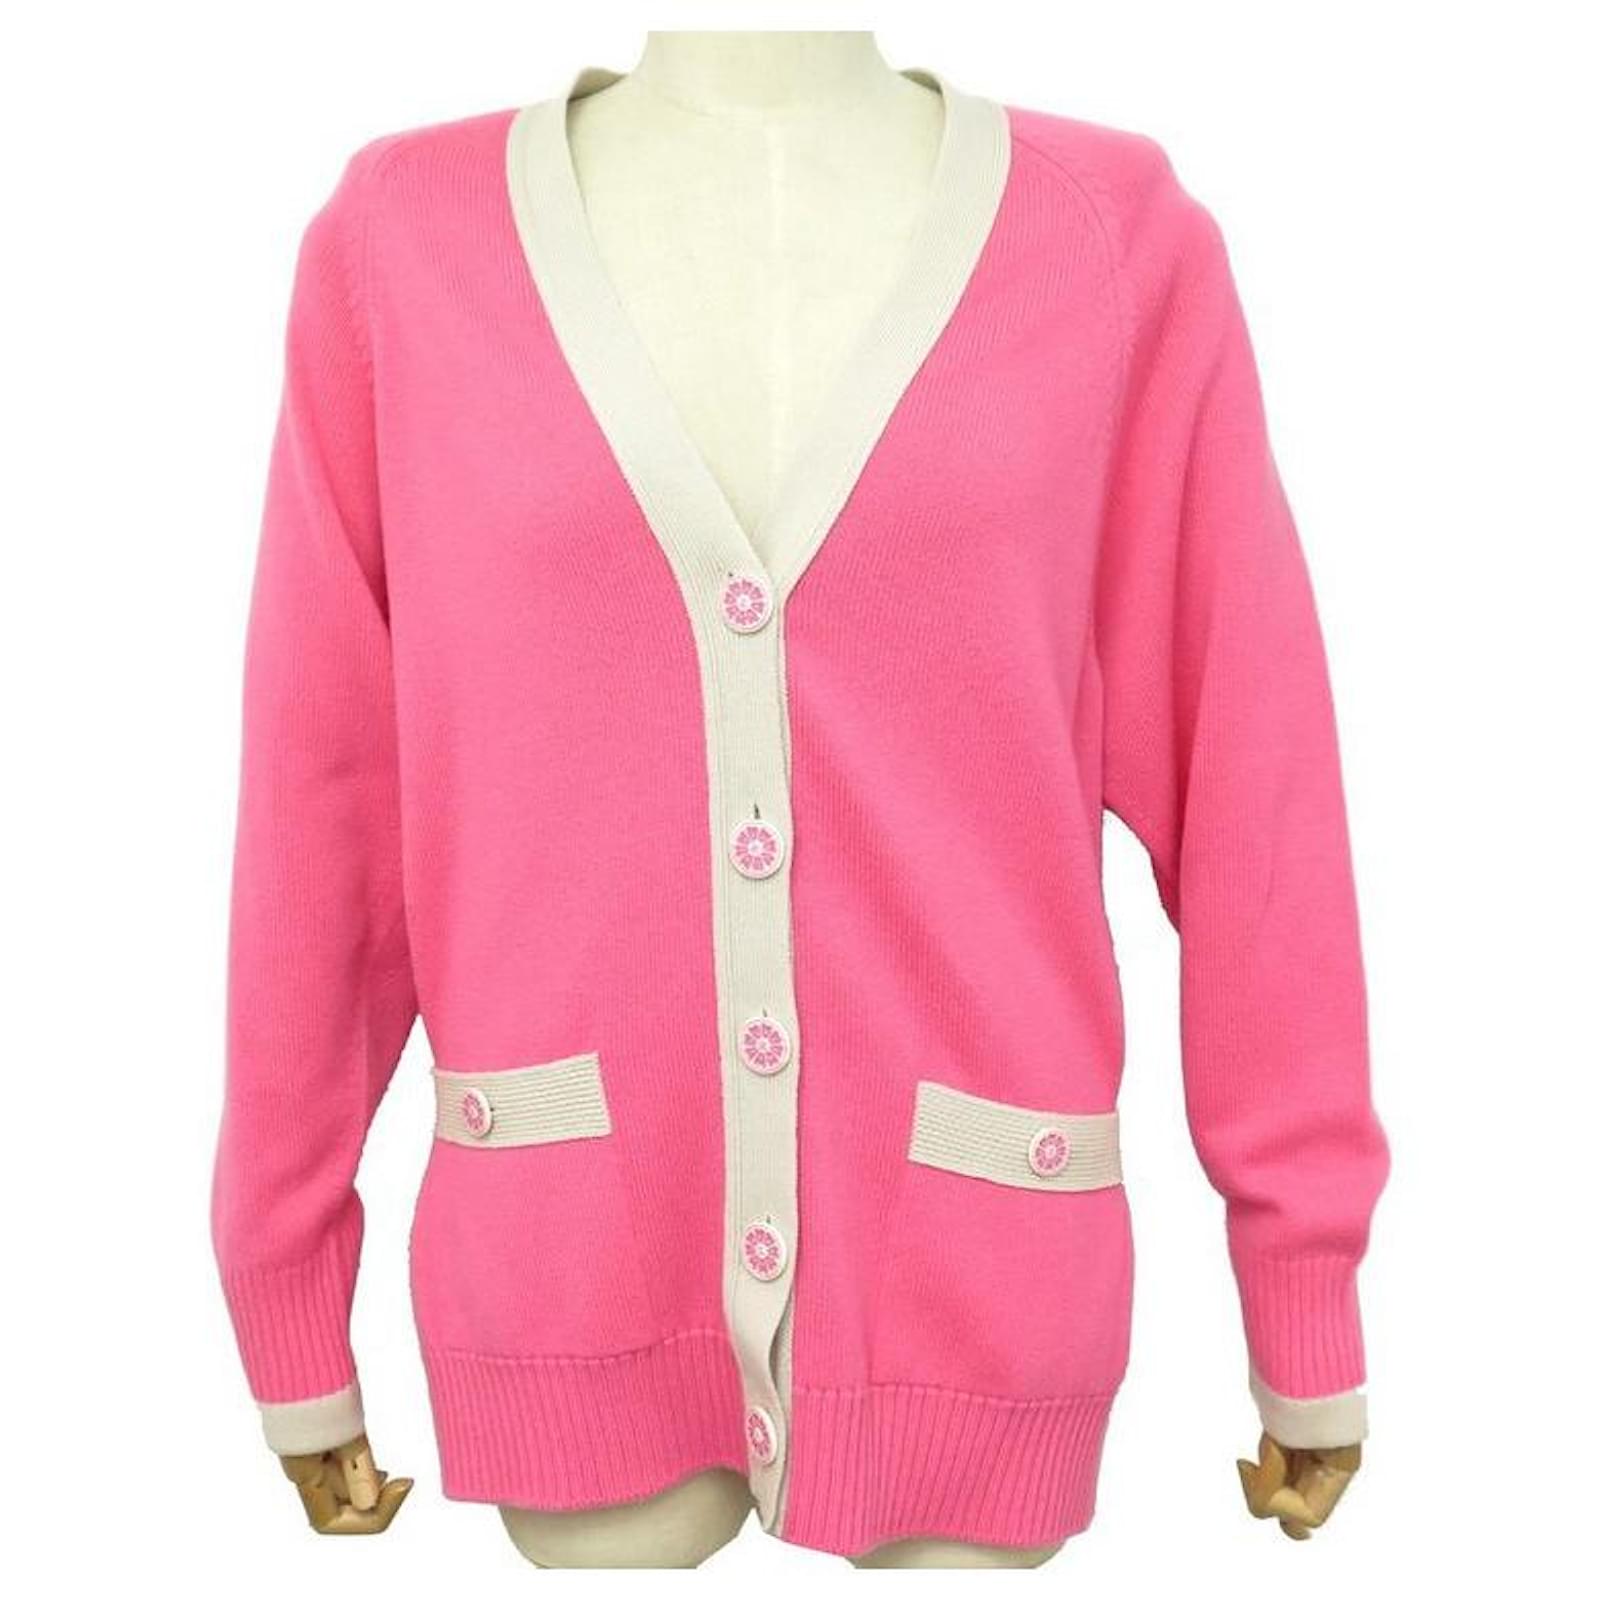 NEW CHANEL PULLOVER LONG CARDIGAN P53235 l 42 PINK CASHMERE SWEATSHIRT